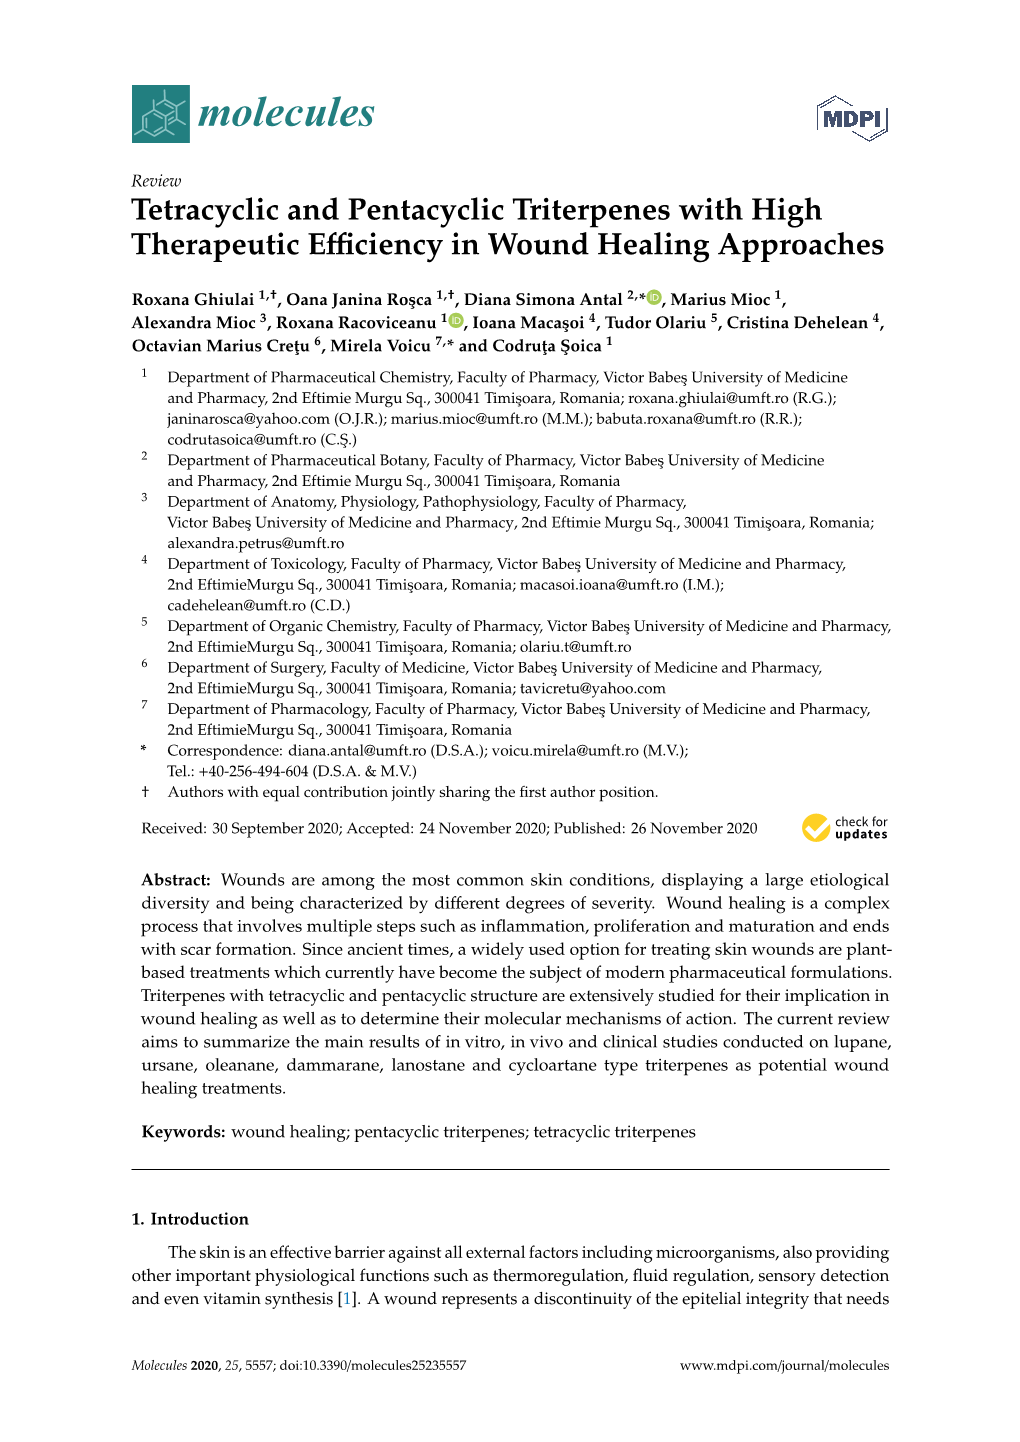 Tetracyclic and Pentacyclic Triterpenes with High Therapeutic Eﬃciency in Wound Healing Approaches